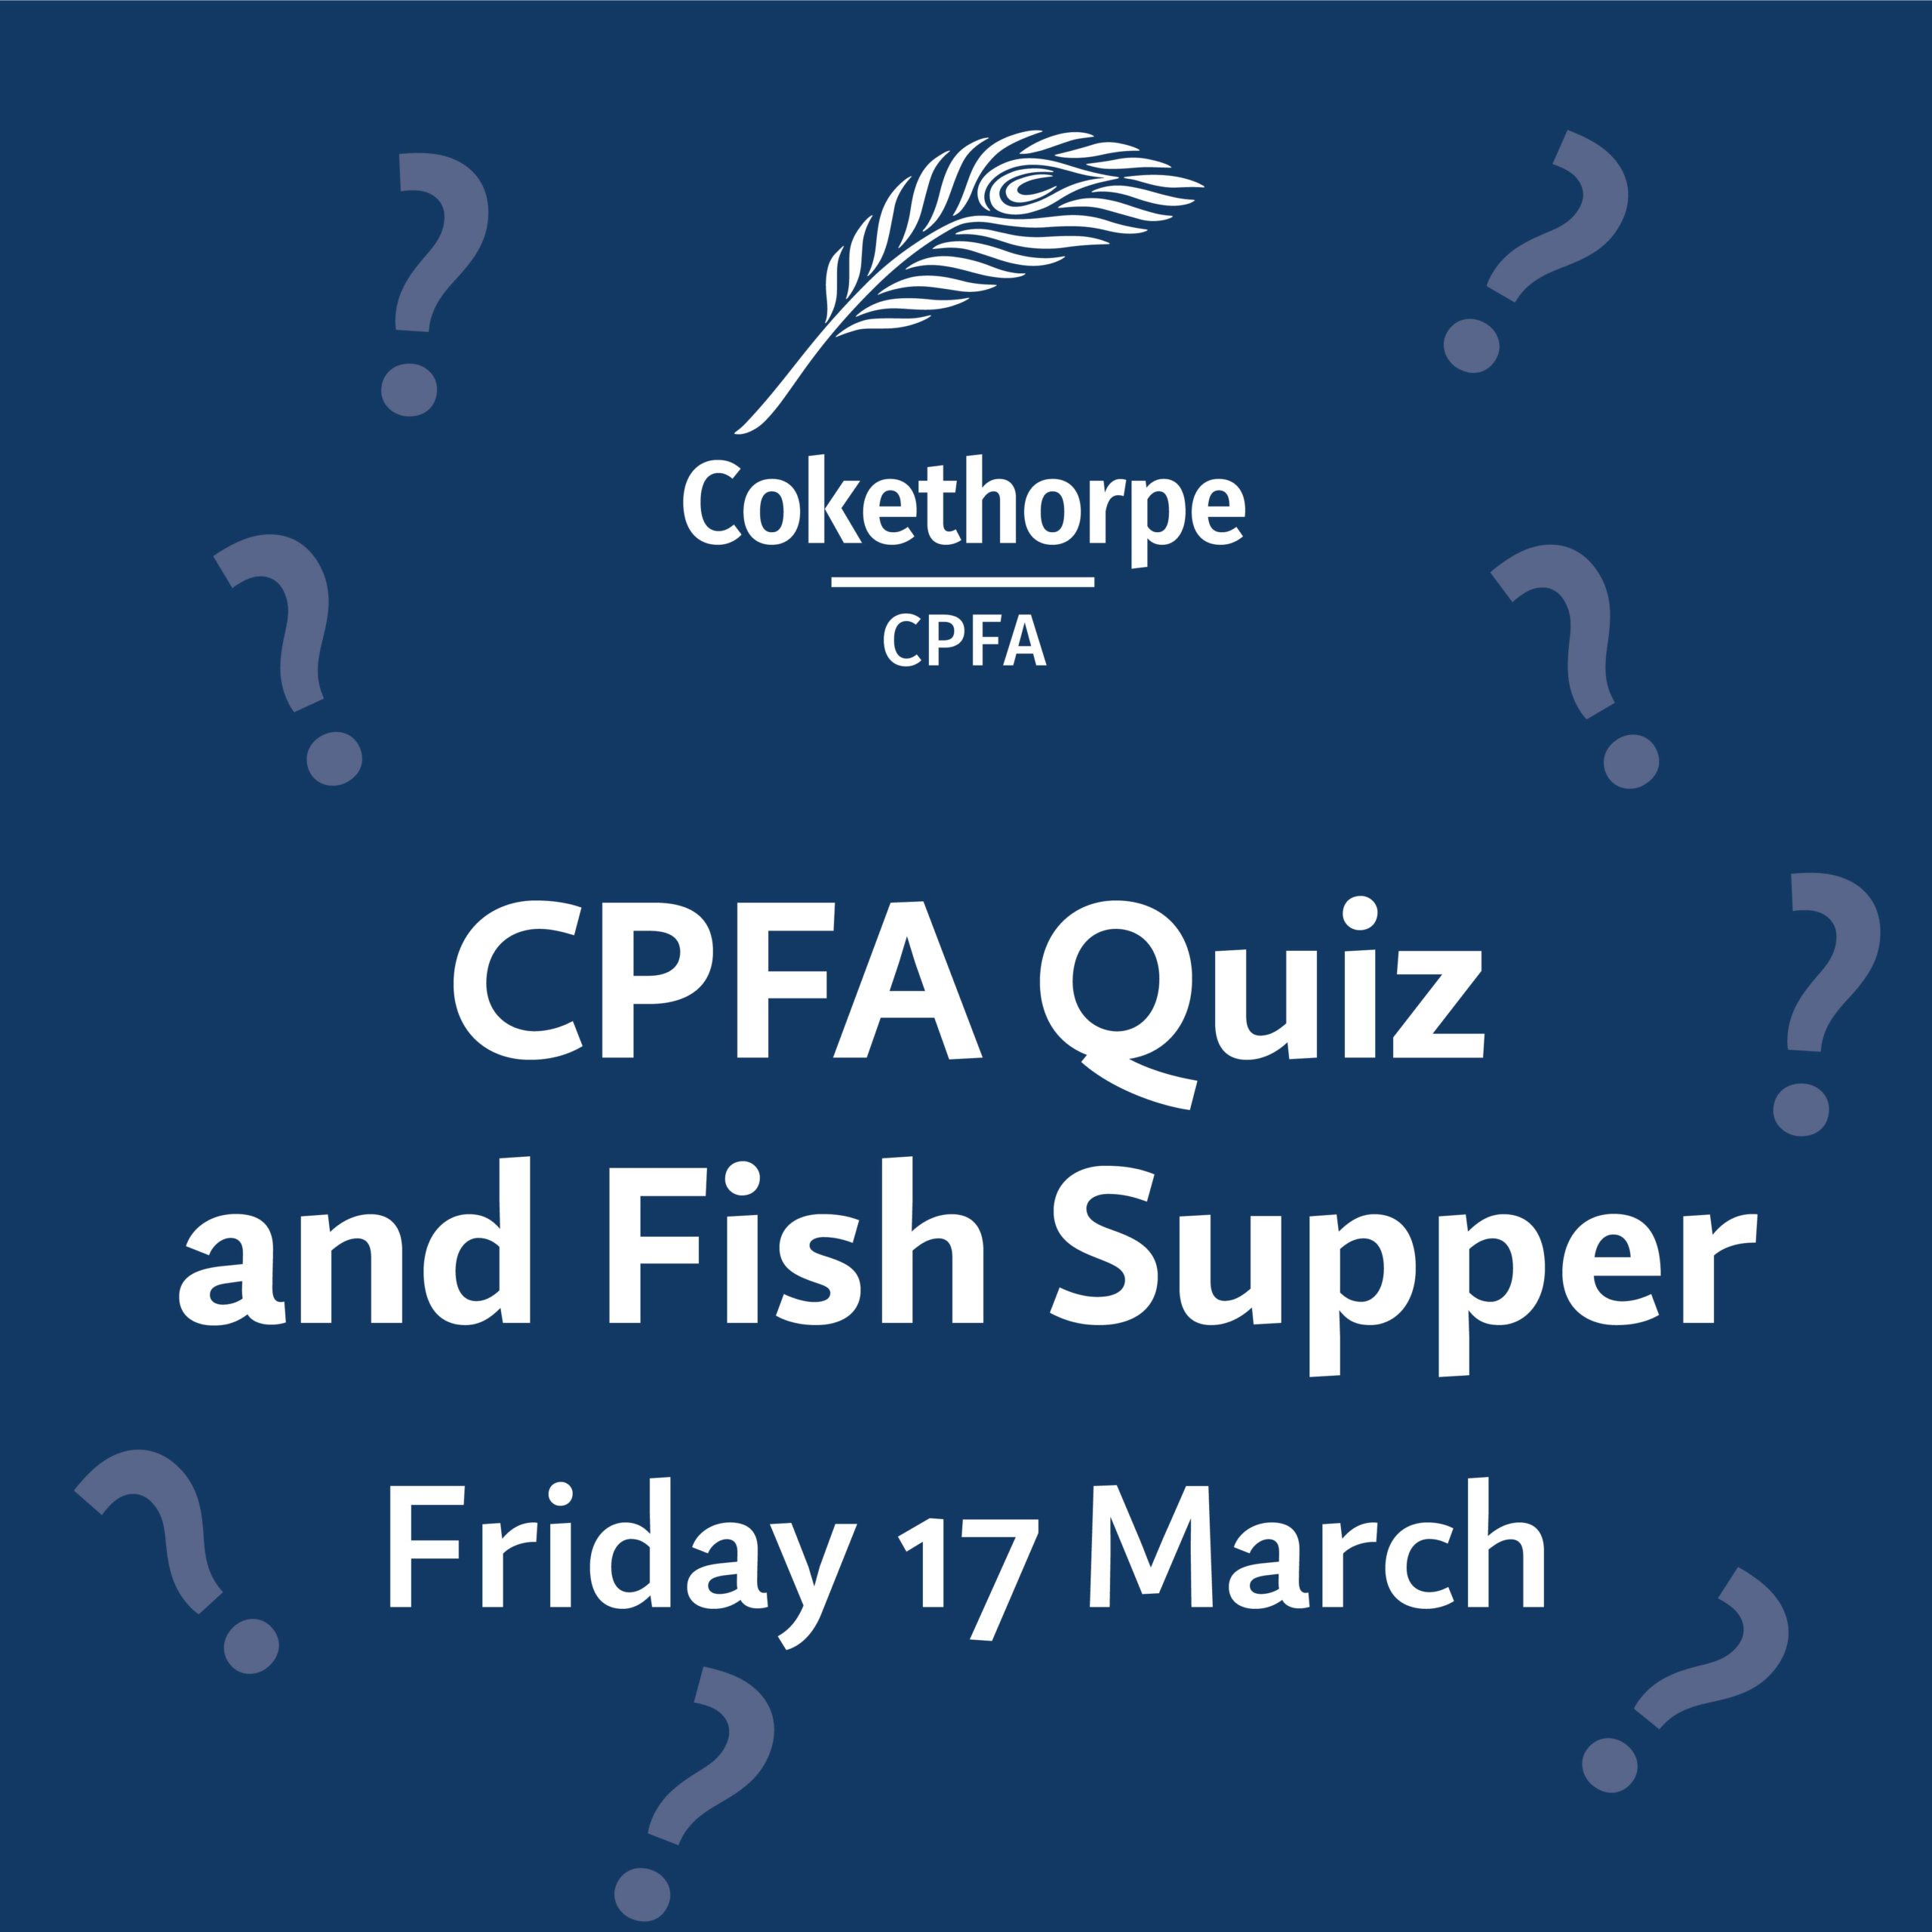 Quiz and Fish Supper event